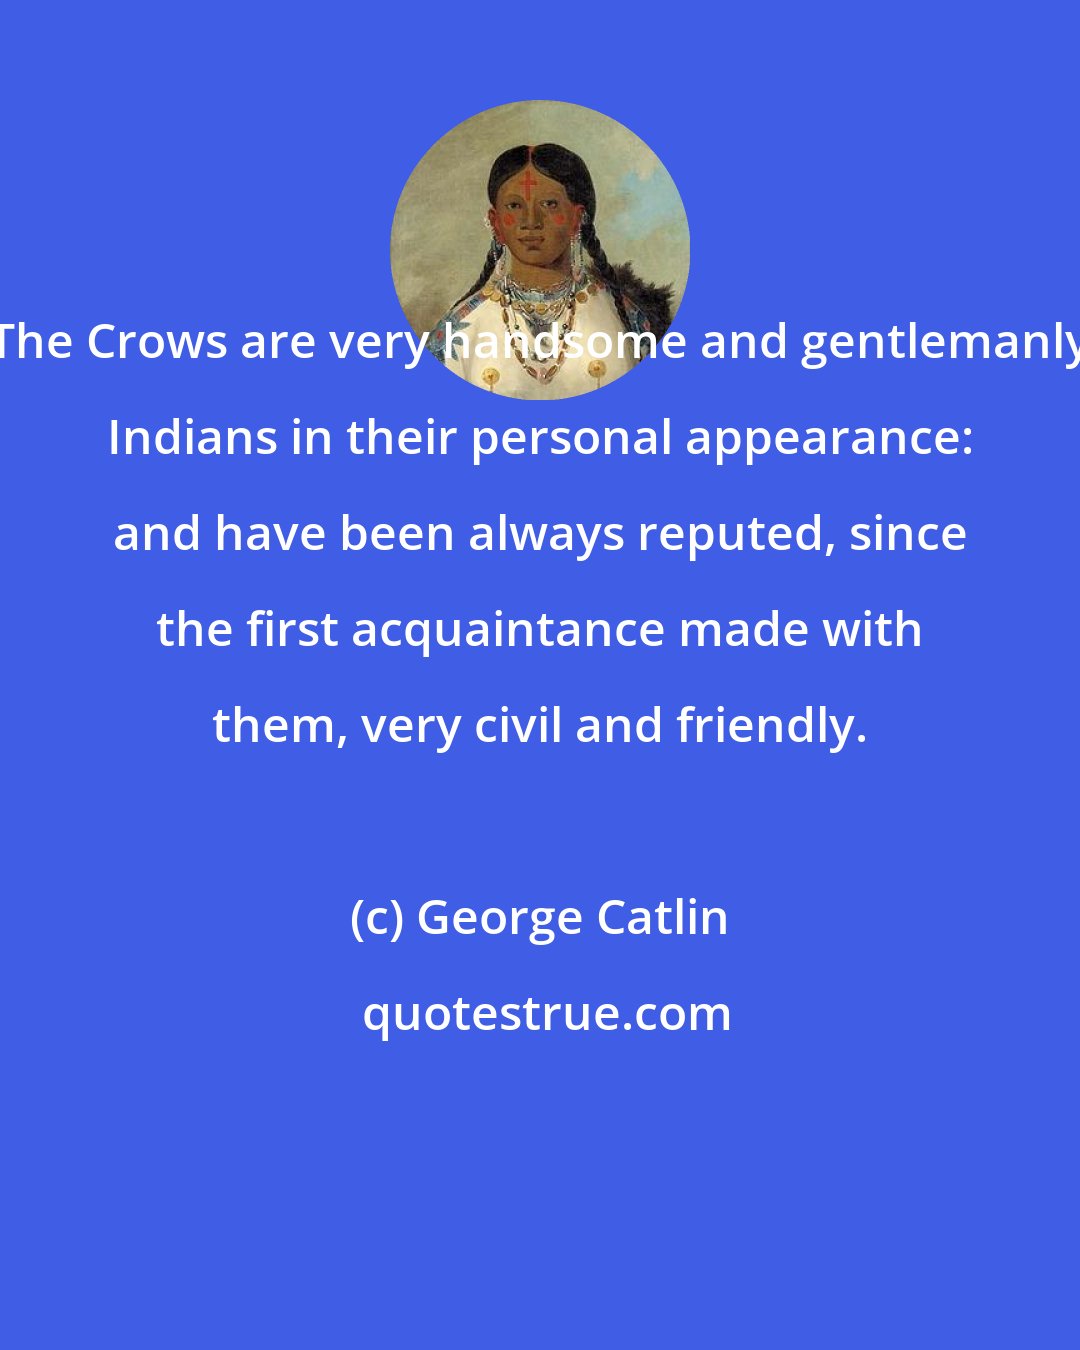 George Catlin: The Crows are very handsome and gentlemanly Indians in their personal appearance: and have been always reputed, since the first acquaintance made with them, very civil and friendly.